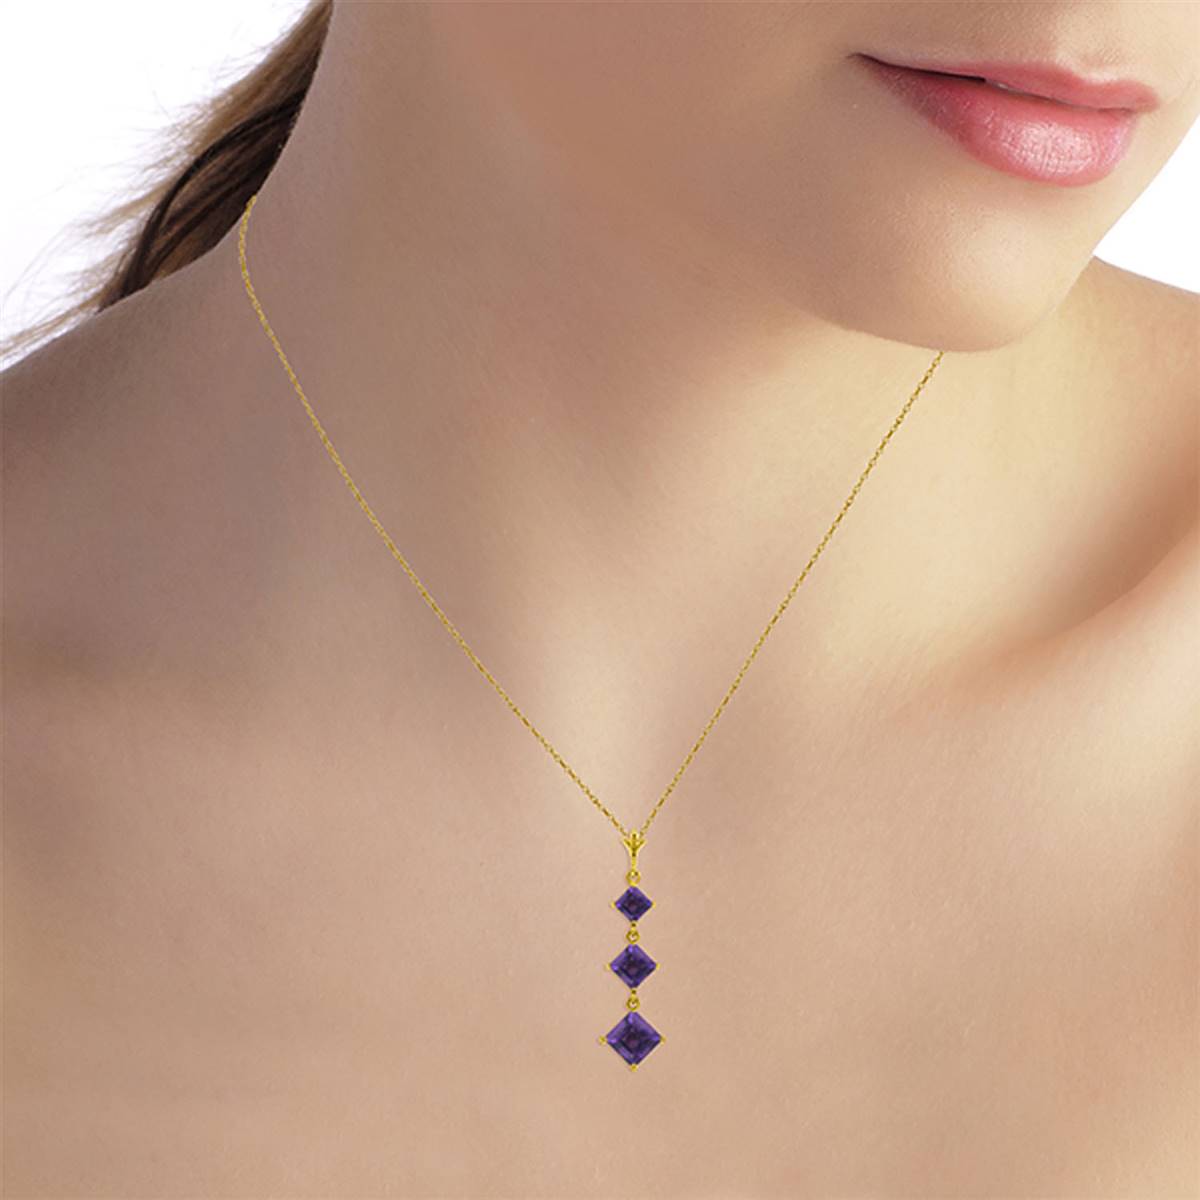 2.4 Carat 14K Solid Yellow Gold Sentimento Amethyst Necklace